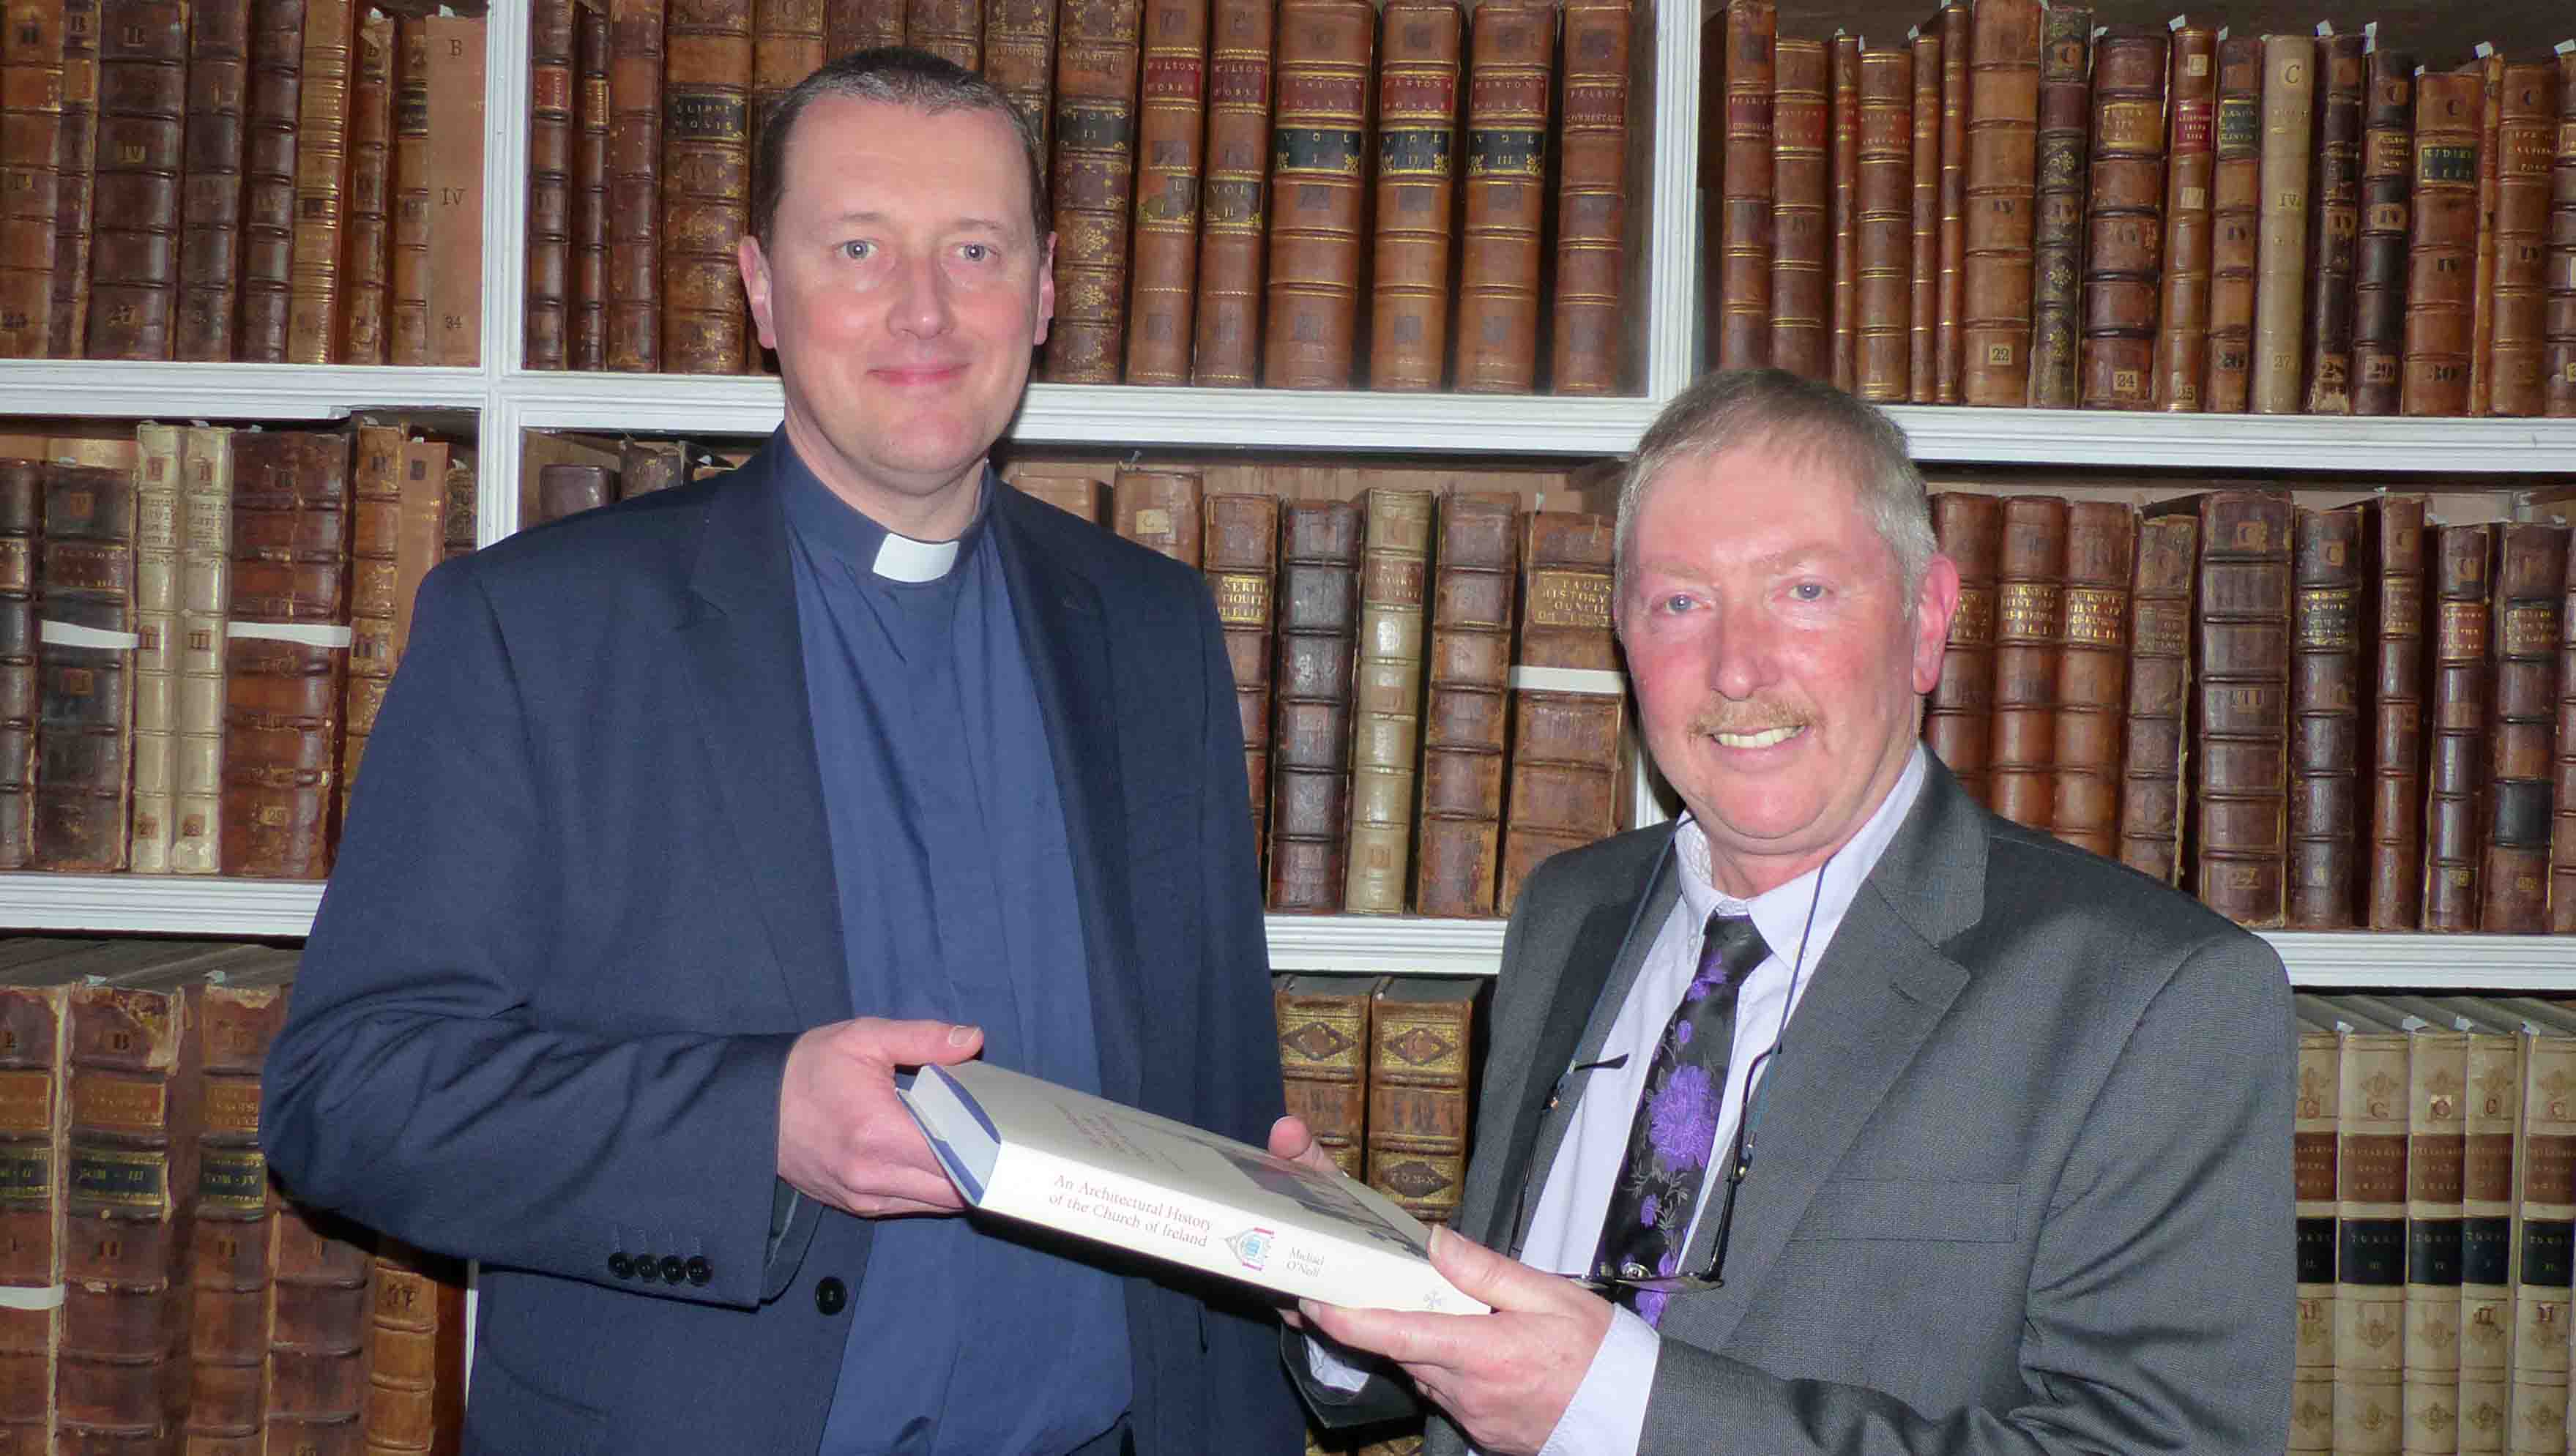 Dr Michael O'Neill presents the Very Revd Shane Forster with a copy of 'An Architectural History' for the Library's collection.